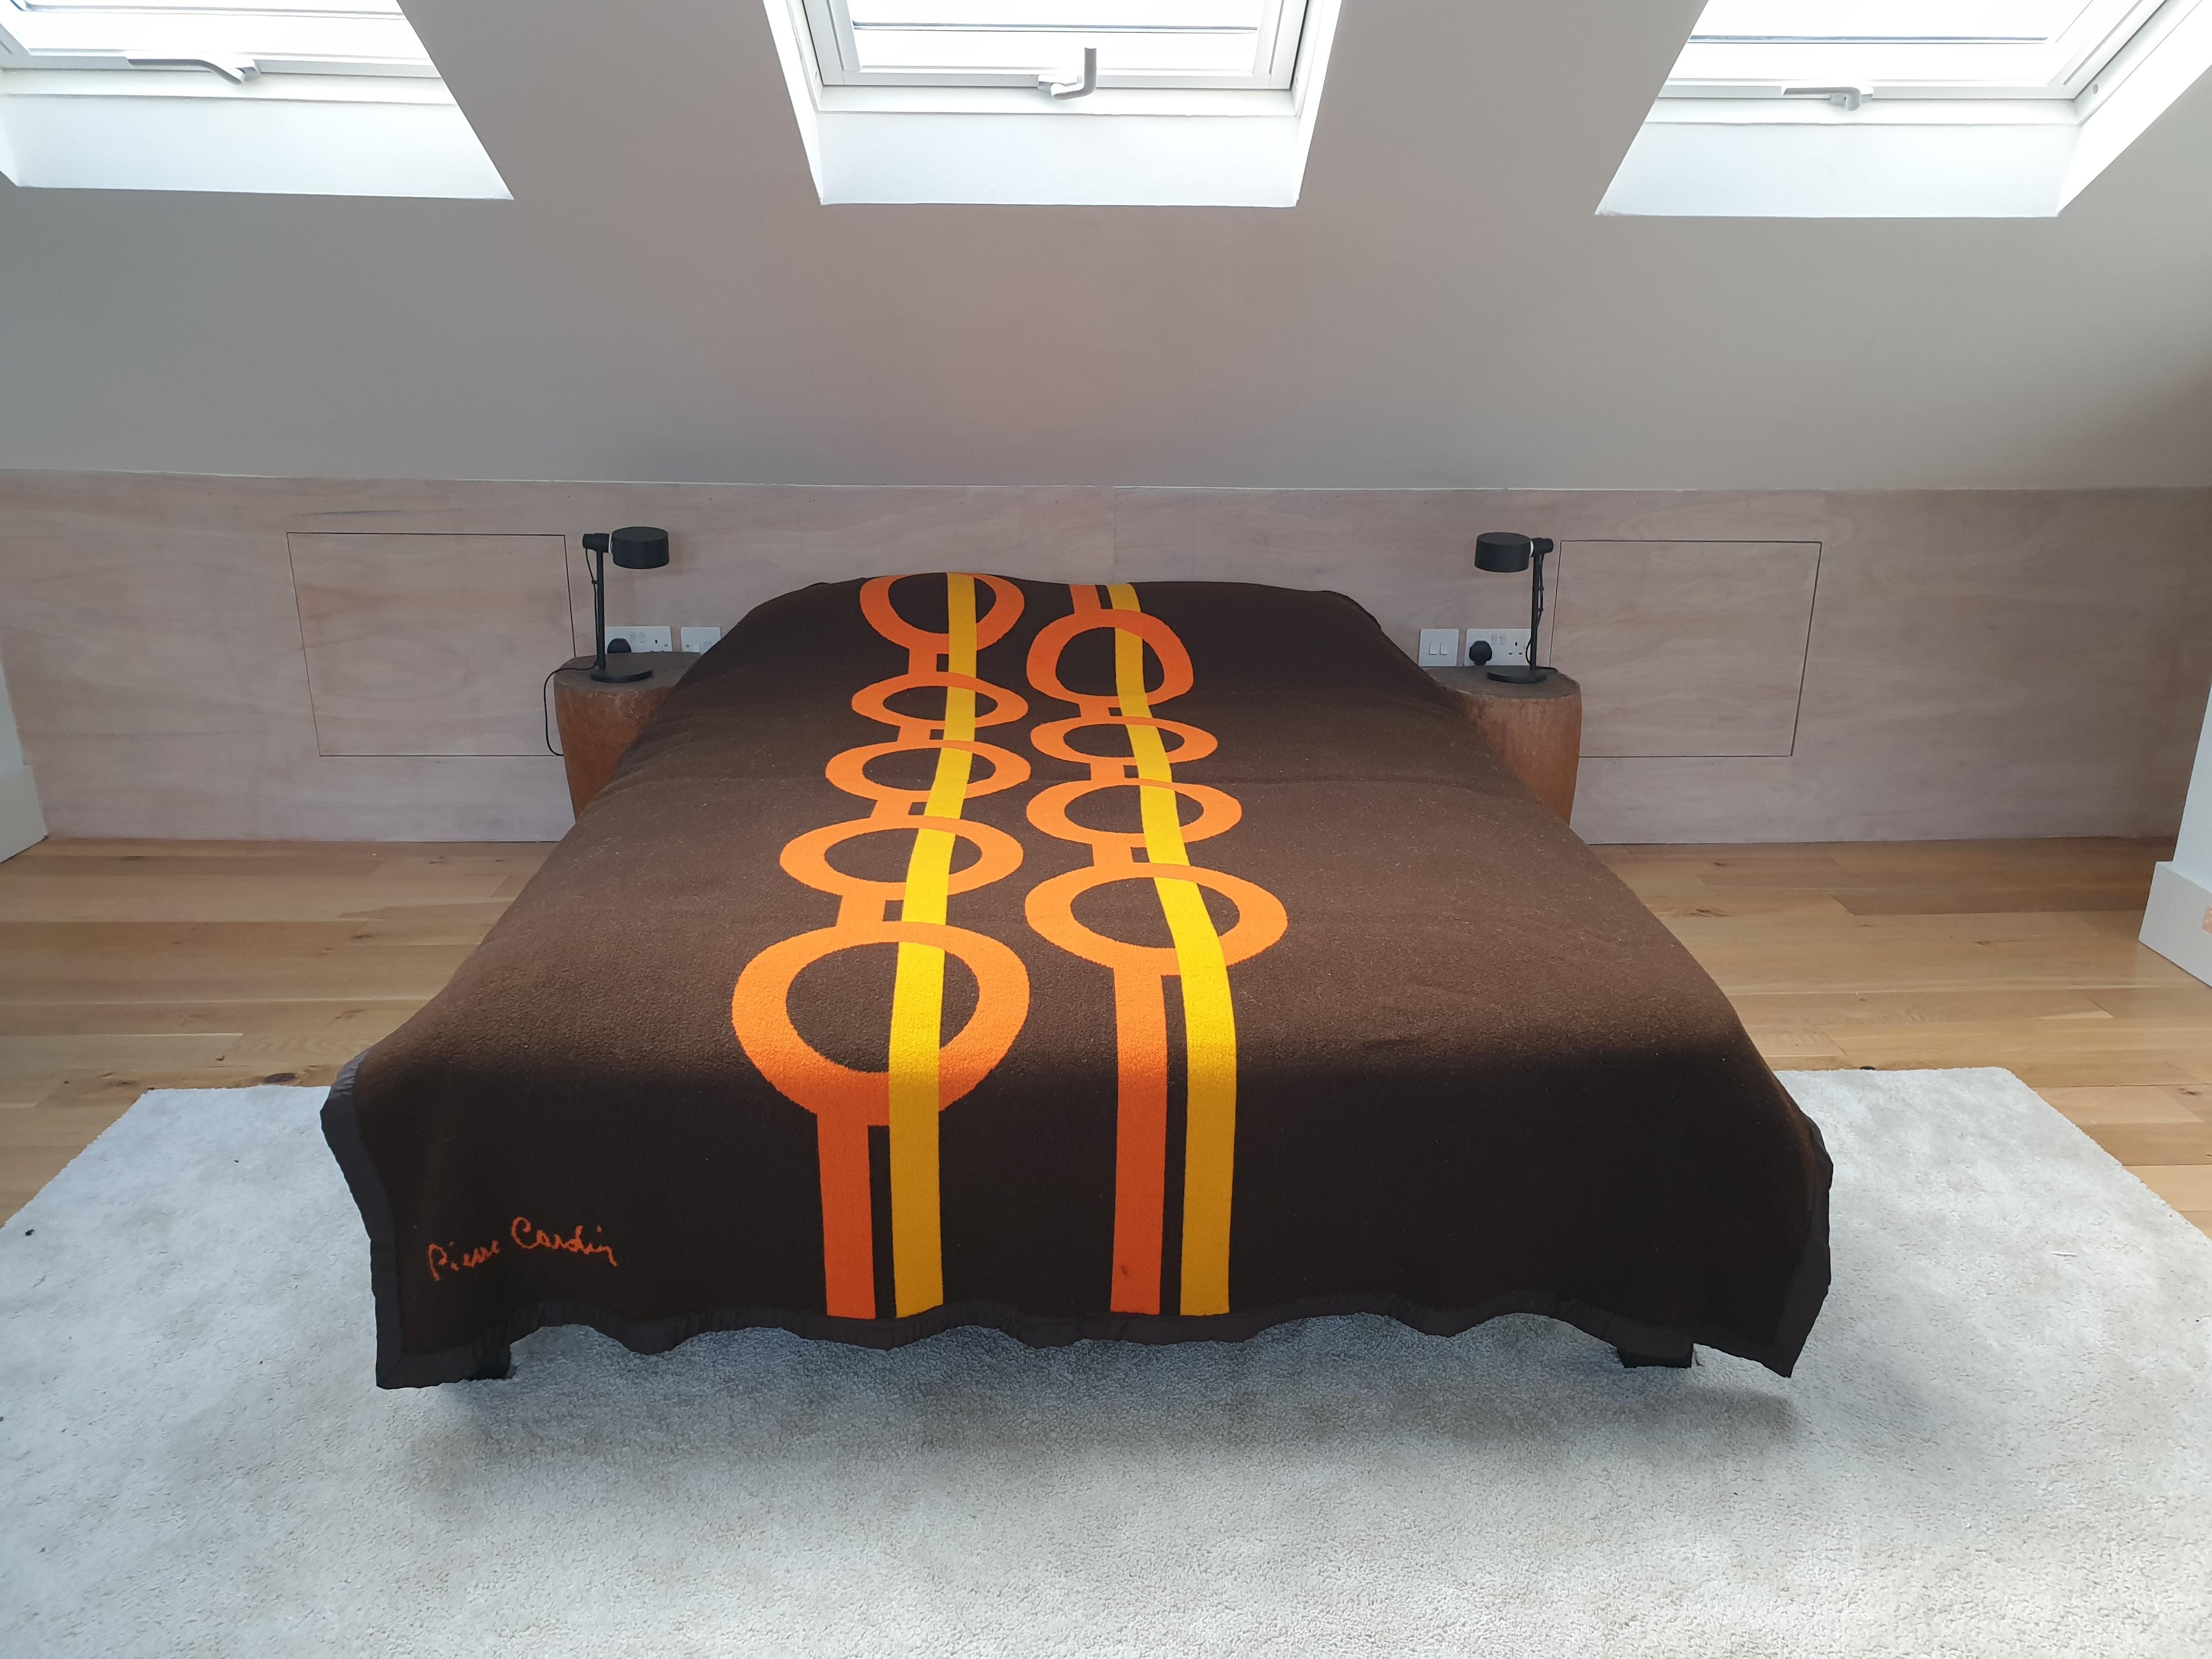 Beautiful woollen bedcover by Pierre Cardin. This cover has the typical intelocking ring design of his work. The main background colour is brown with a design in orange, yellow and black. The edges are bound with a silky edging. The reverse of the